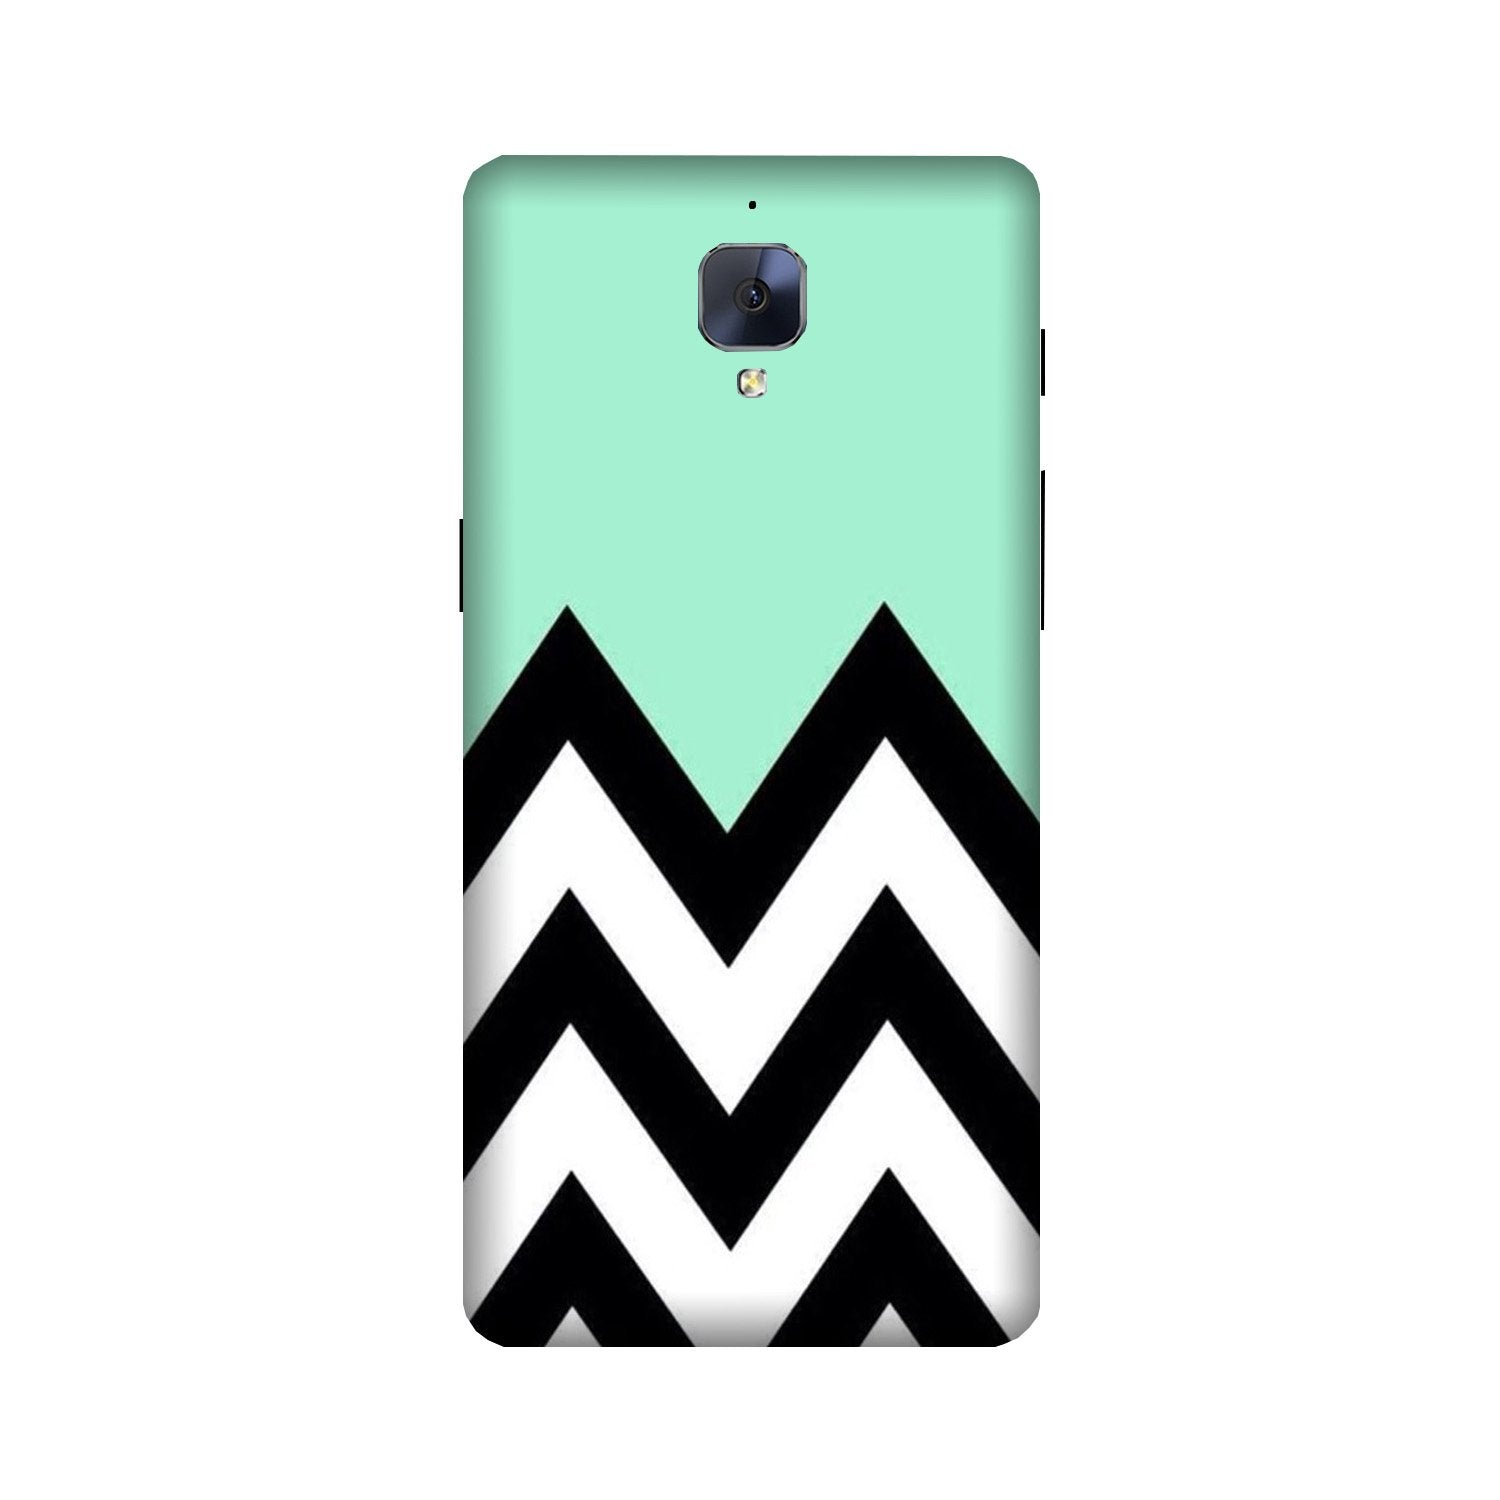 Pattern Case for OnePlus 3/ 3T